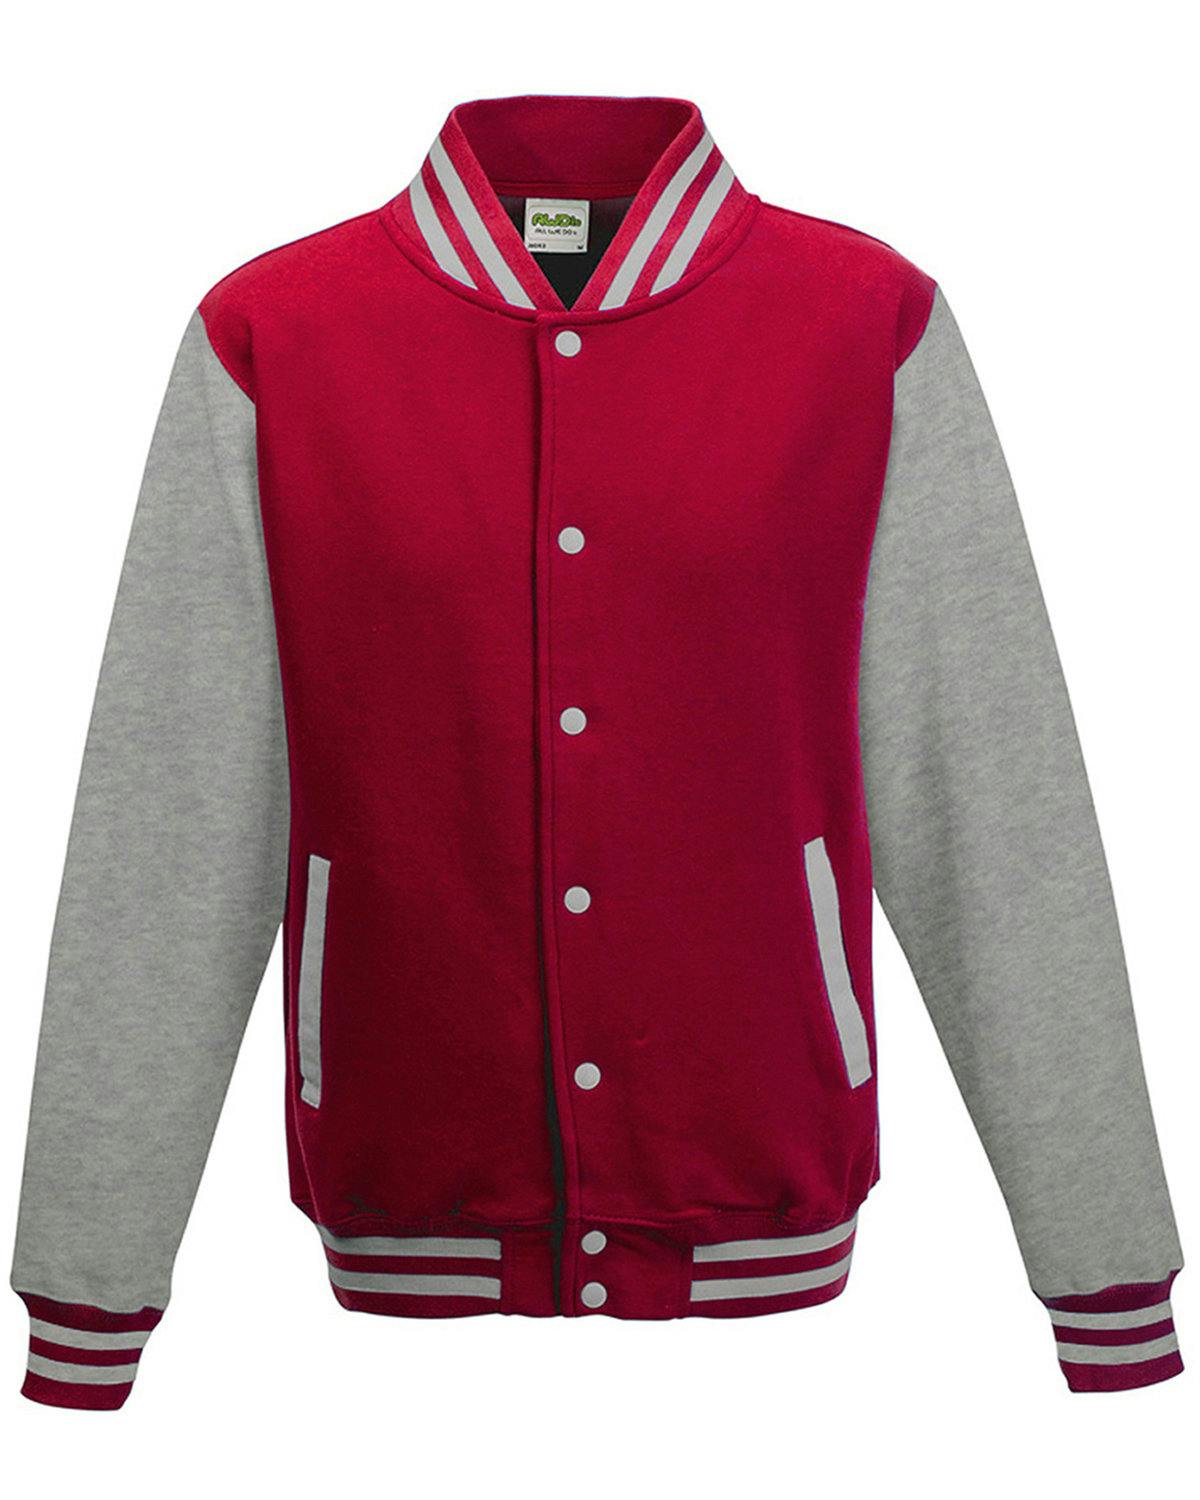 Image for Youth Heavyweight Letterman Jacket